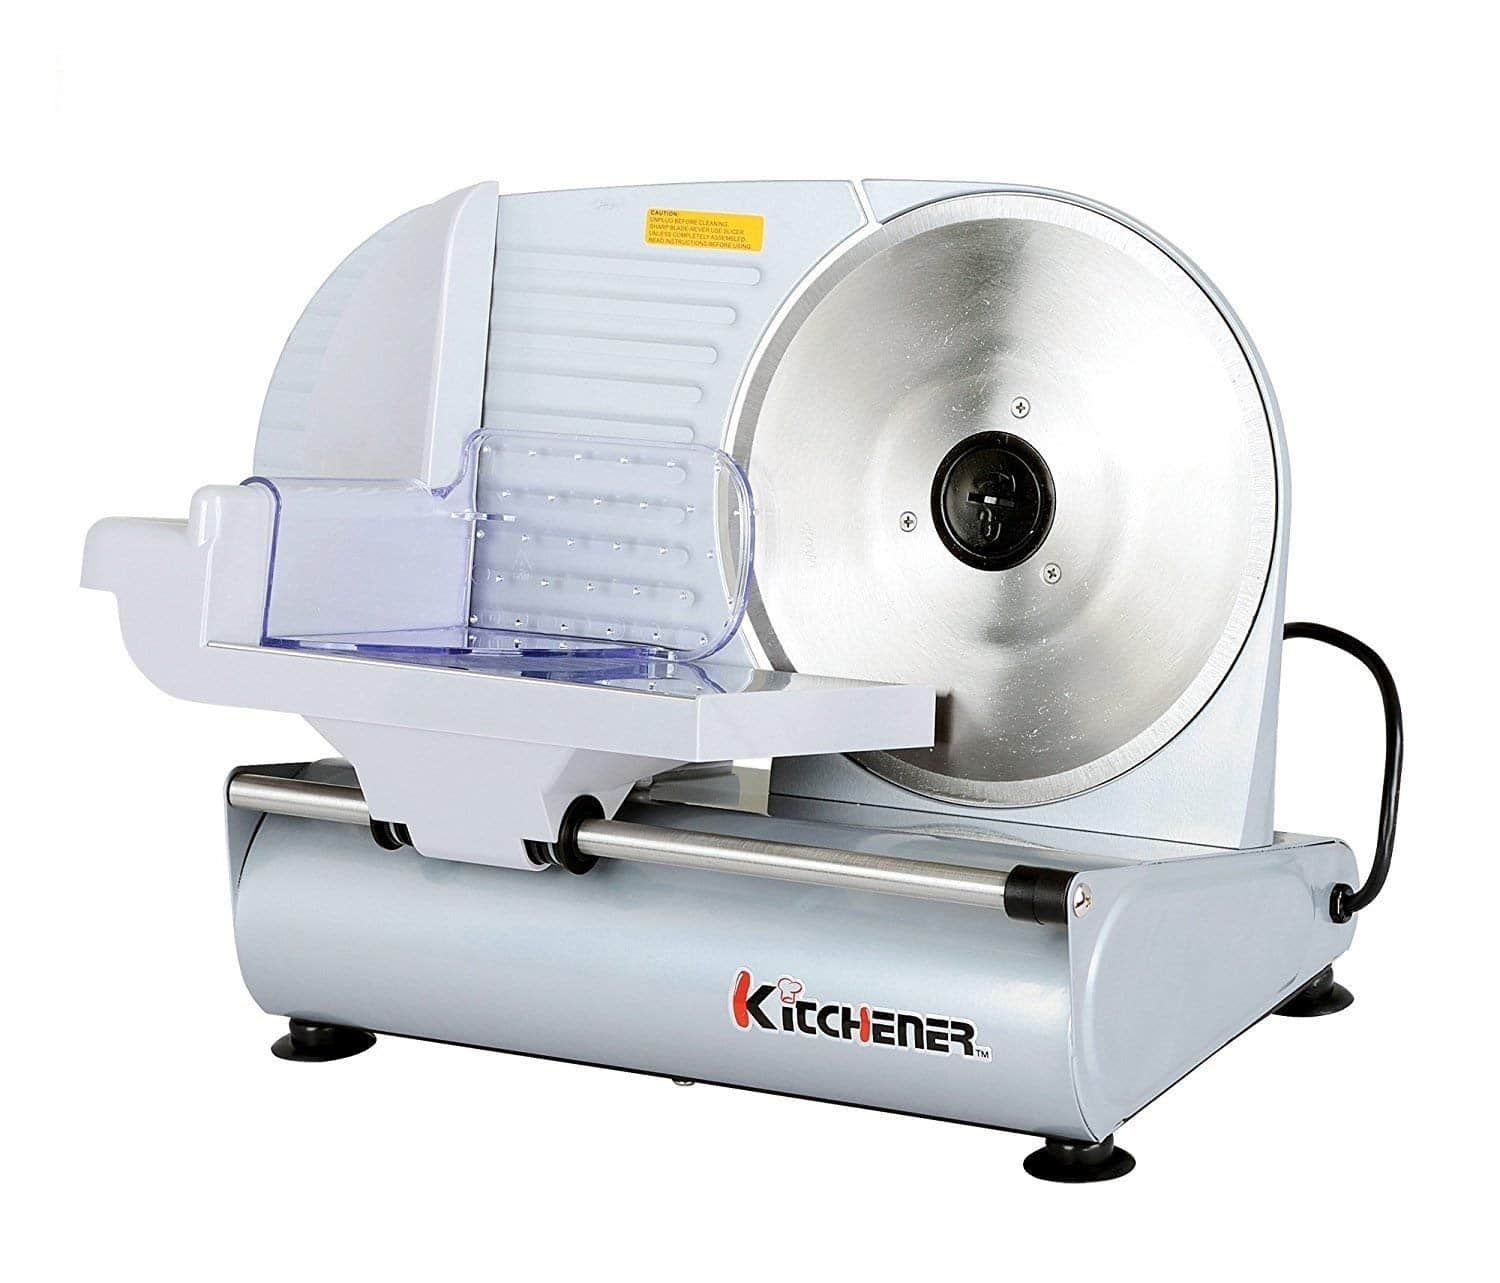 Kitchener 9-inch Professional Electric Meat Slicer